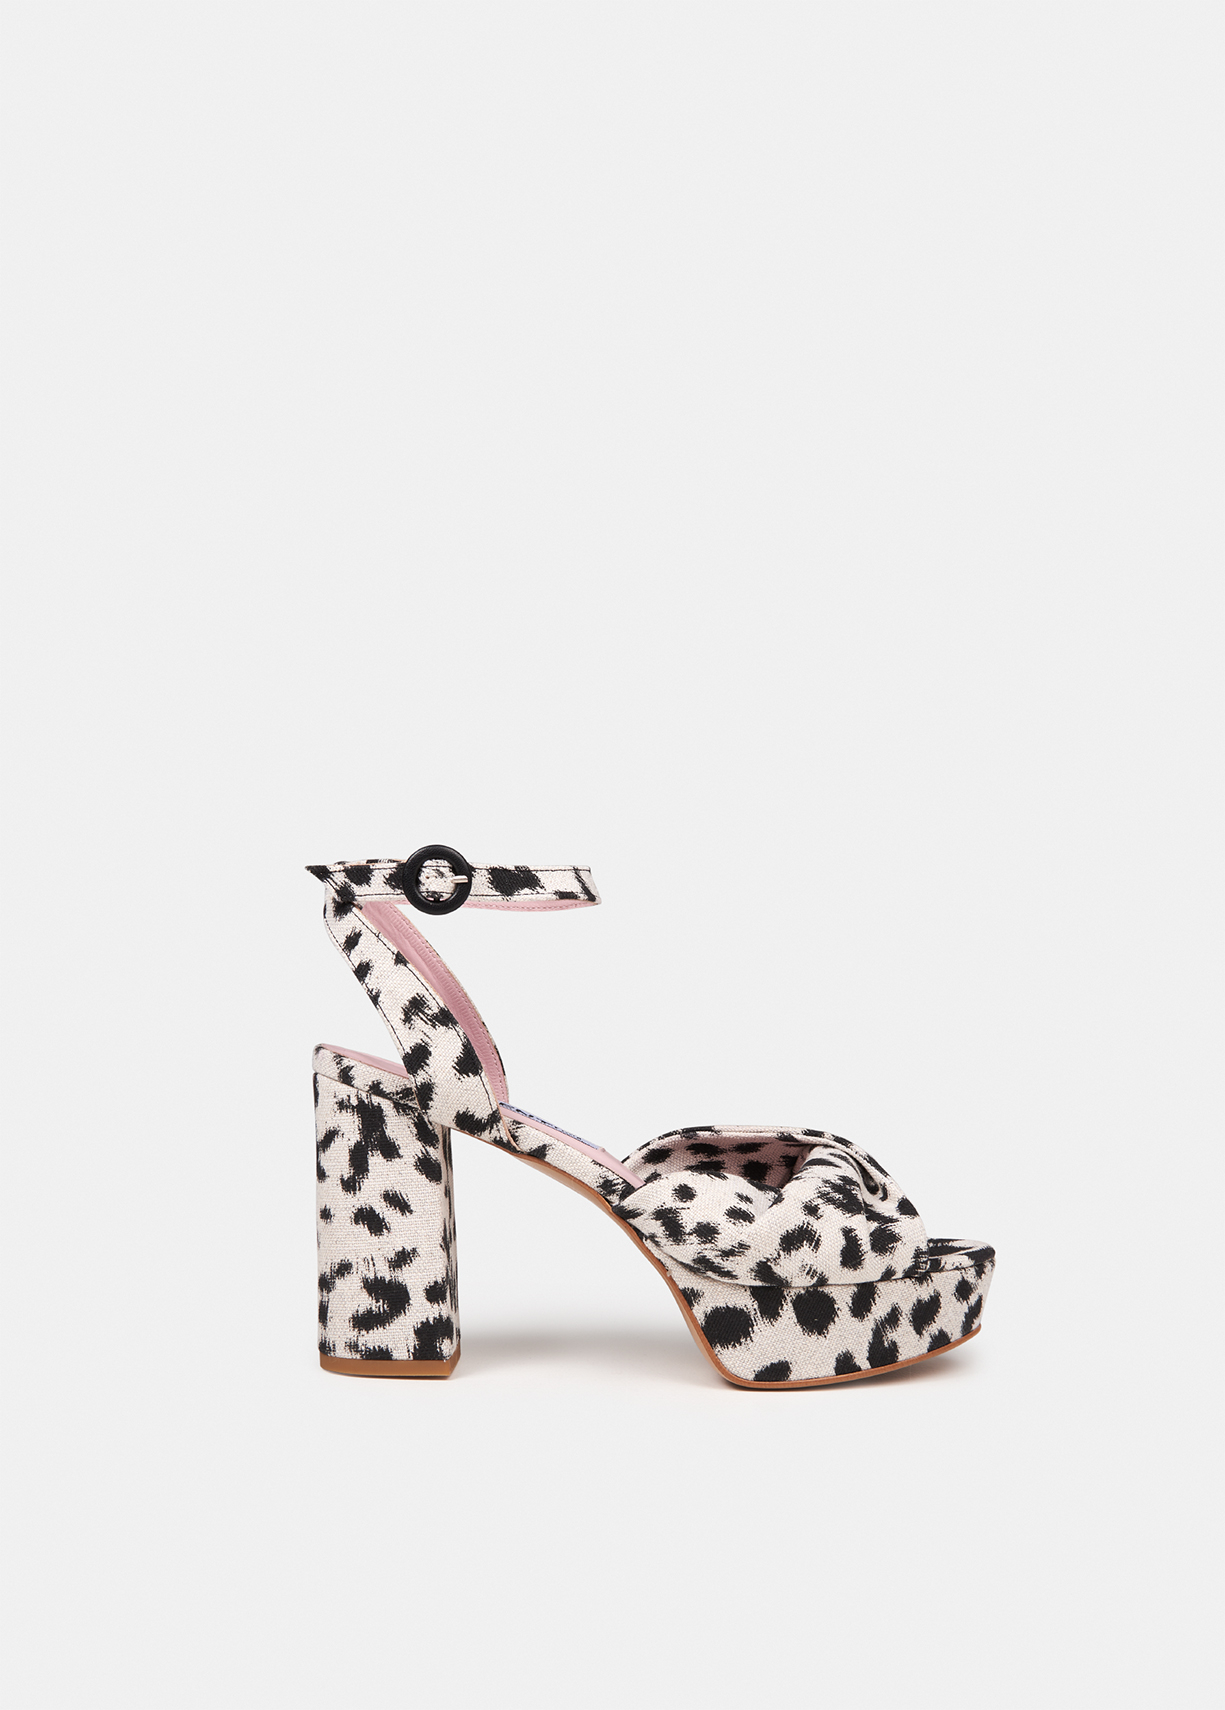 black and white leopard print shoes